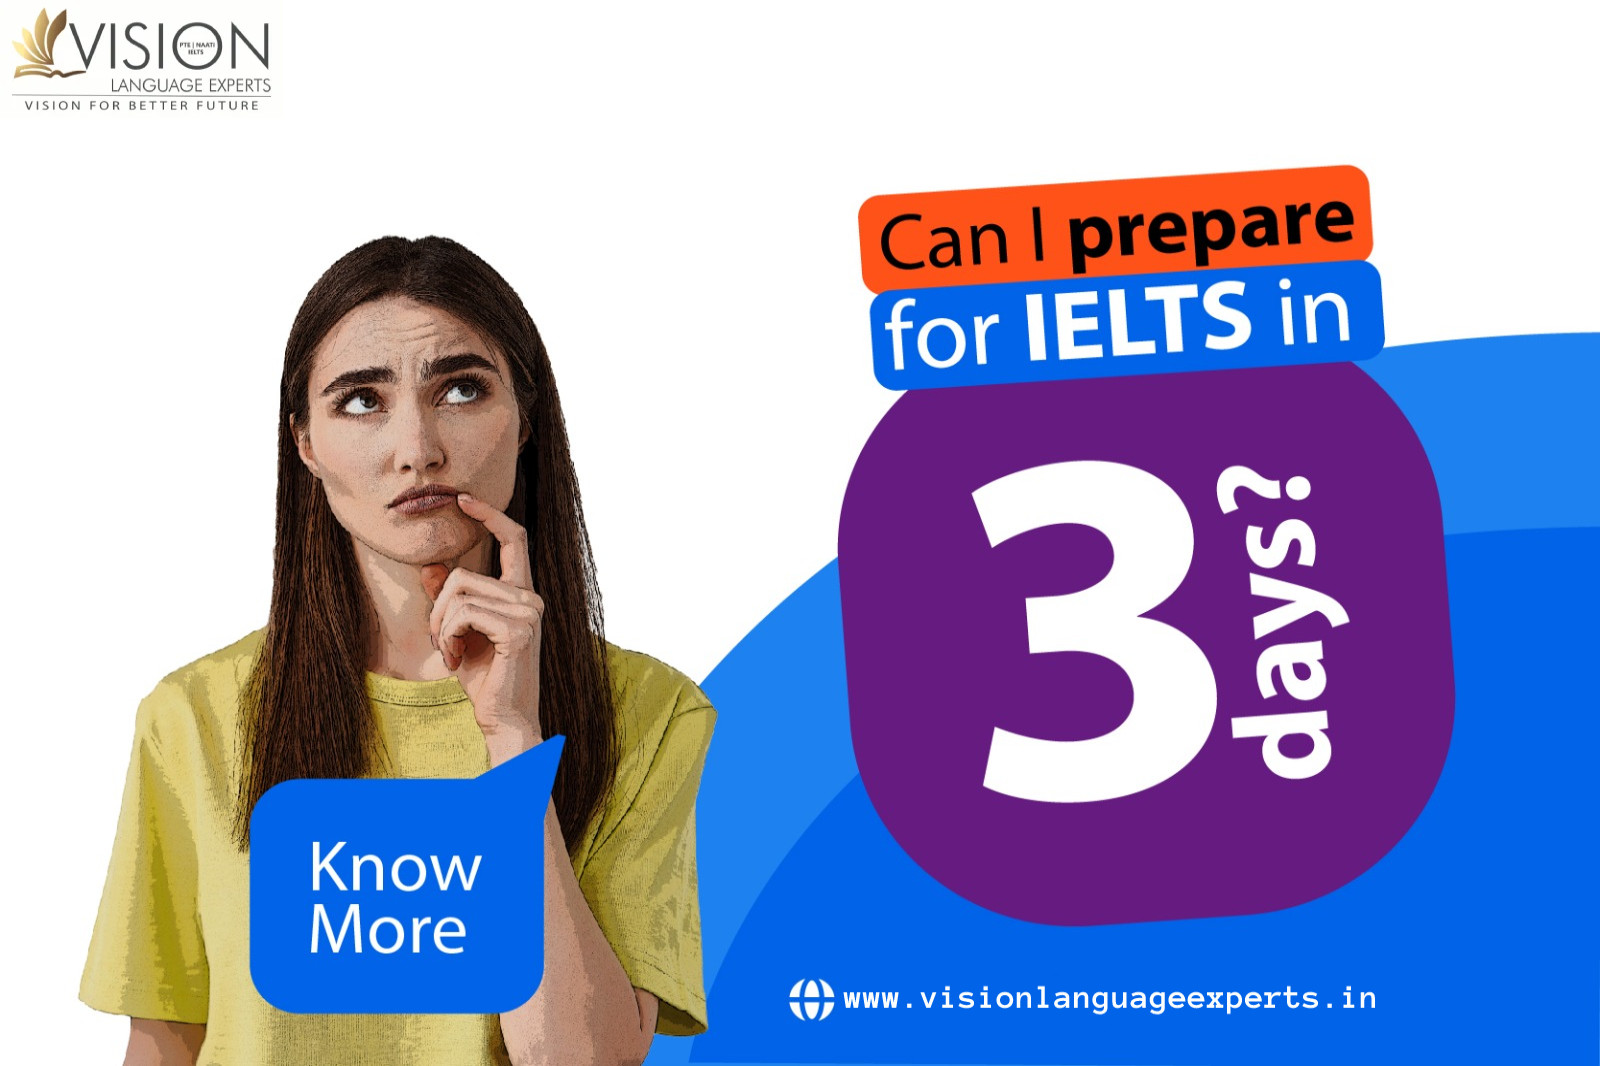 Is it Realistic to Prepare for the IELTS Exam in Just 3 Days?